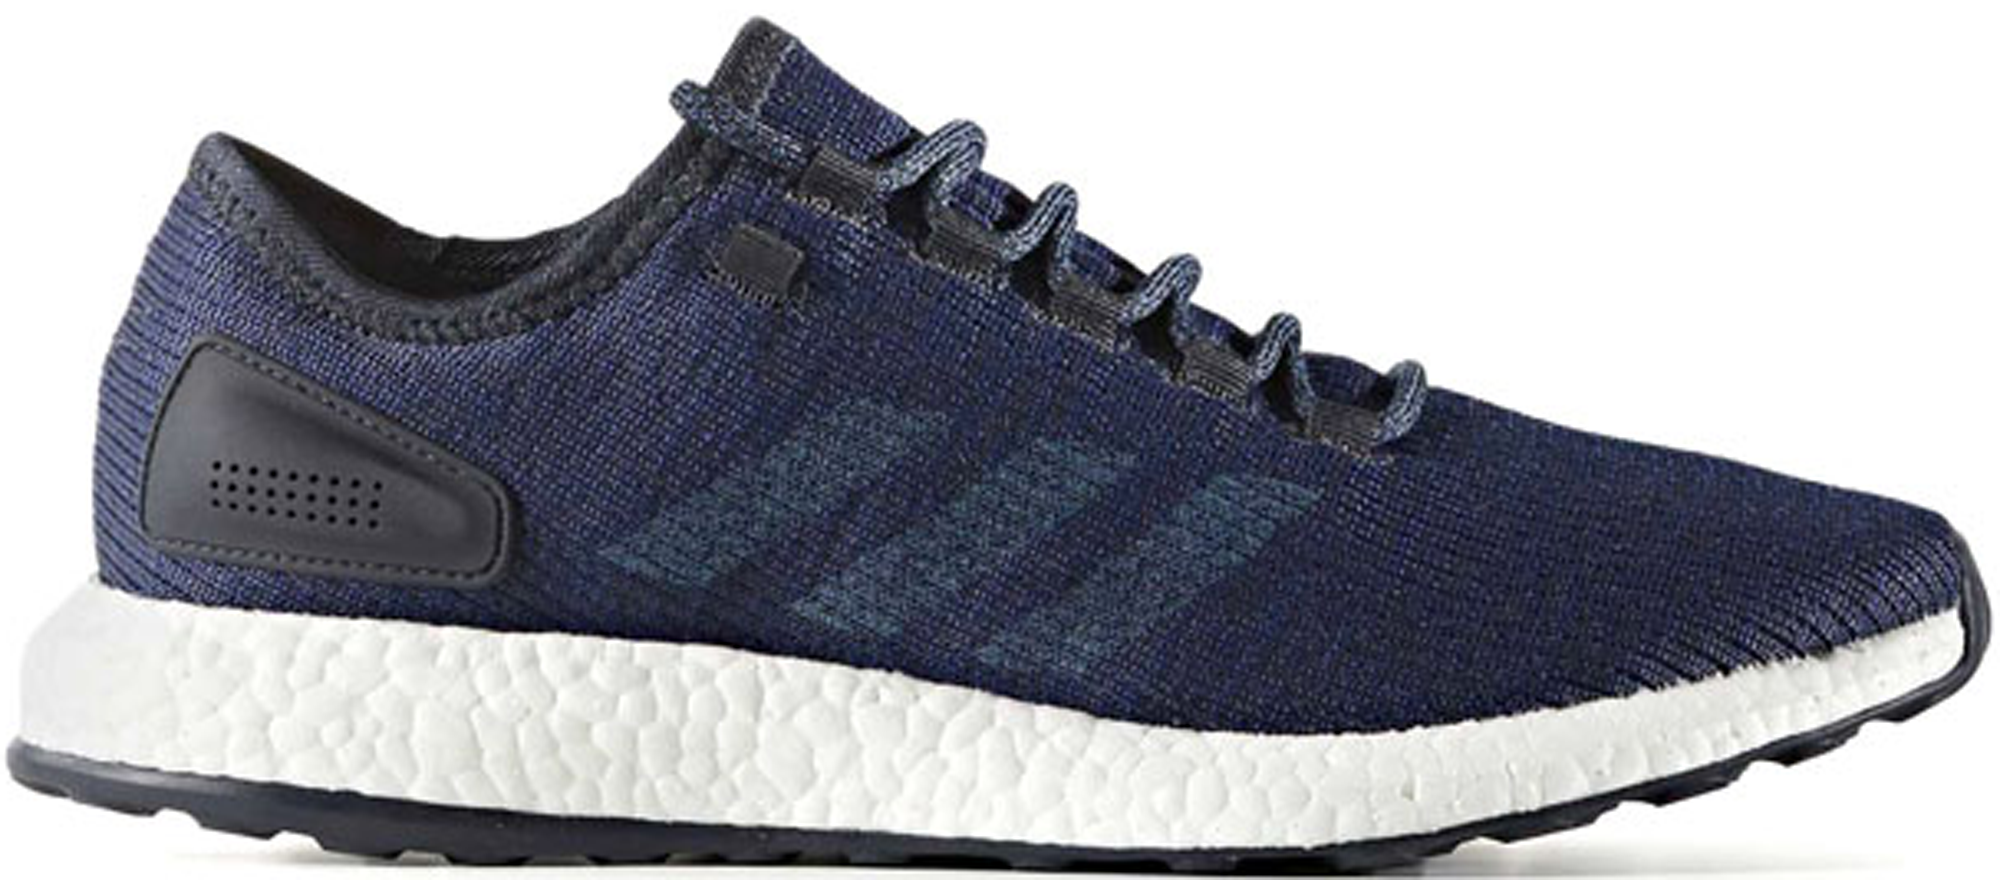 adidas pure boost navy blue